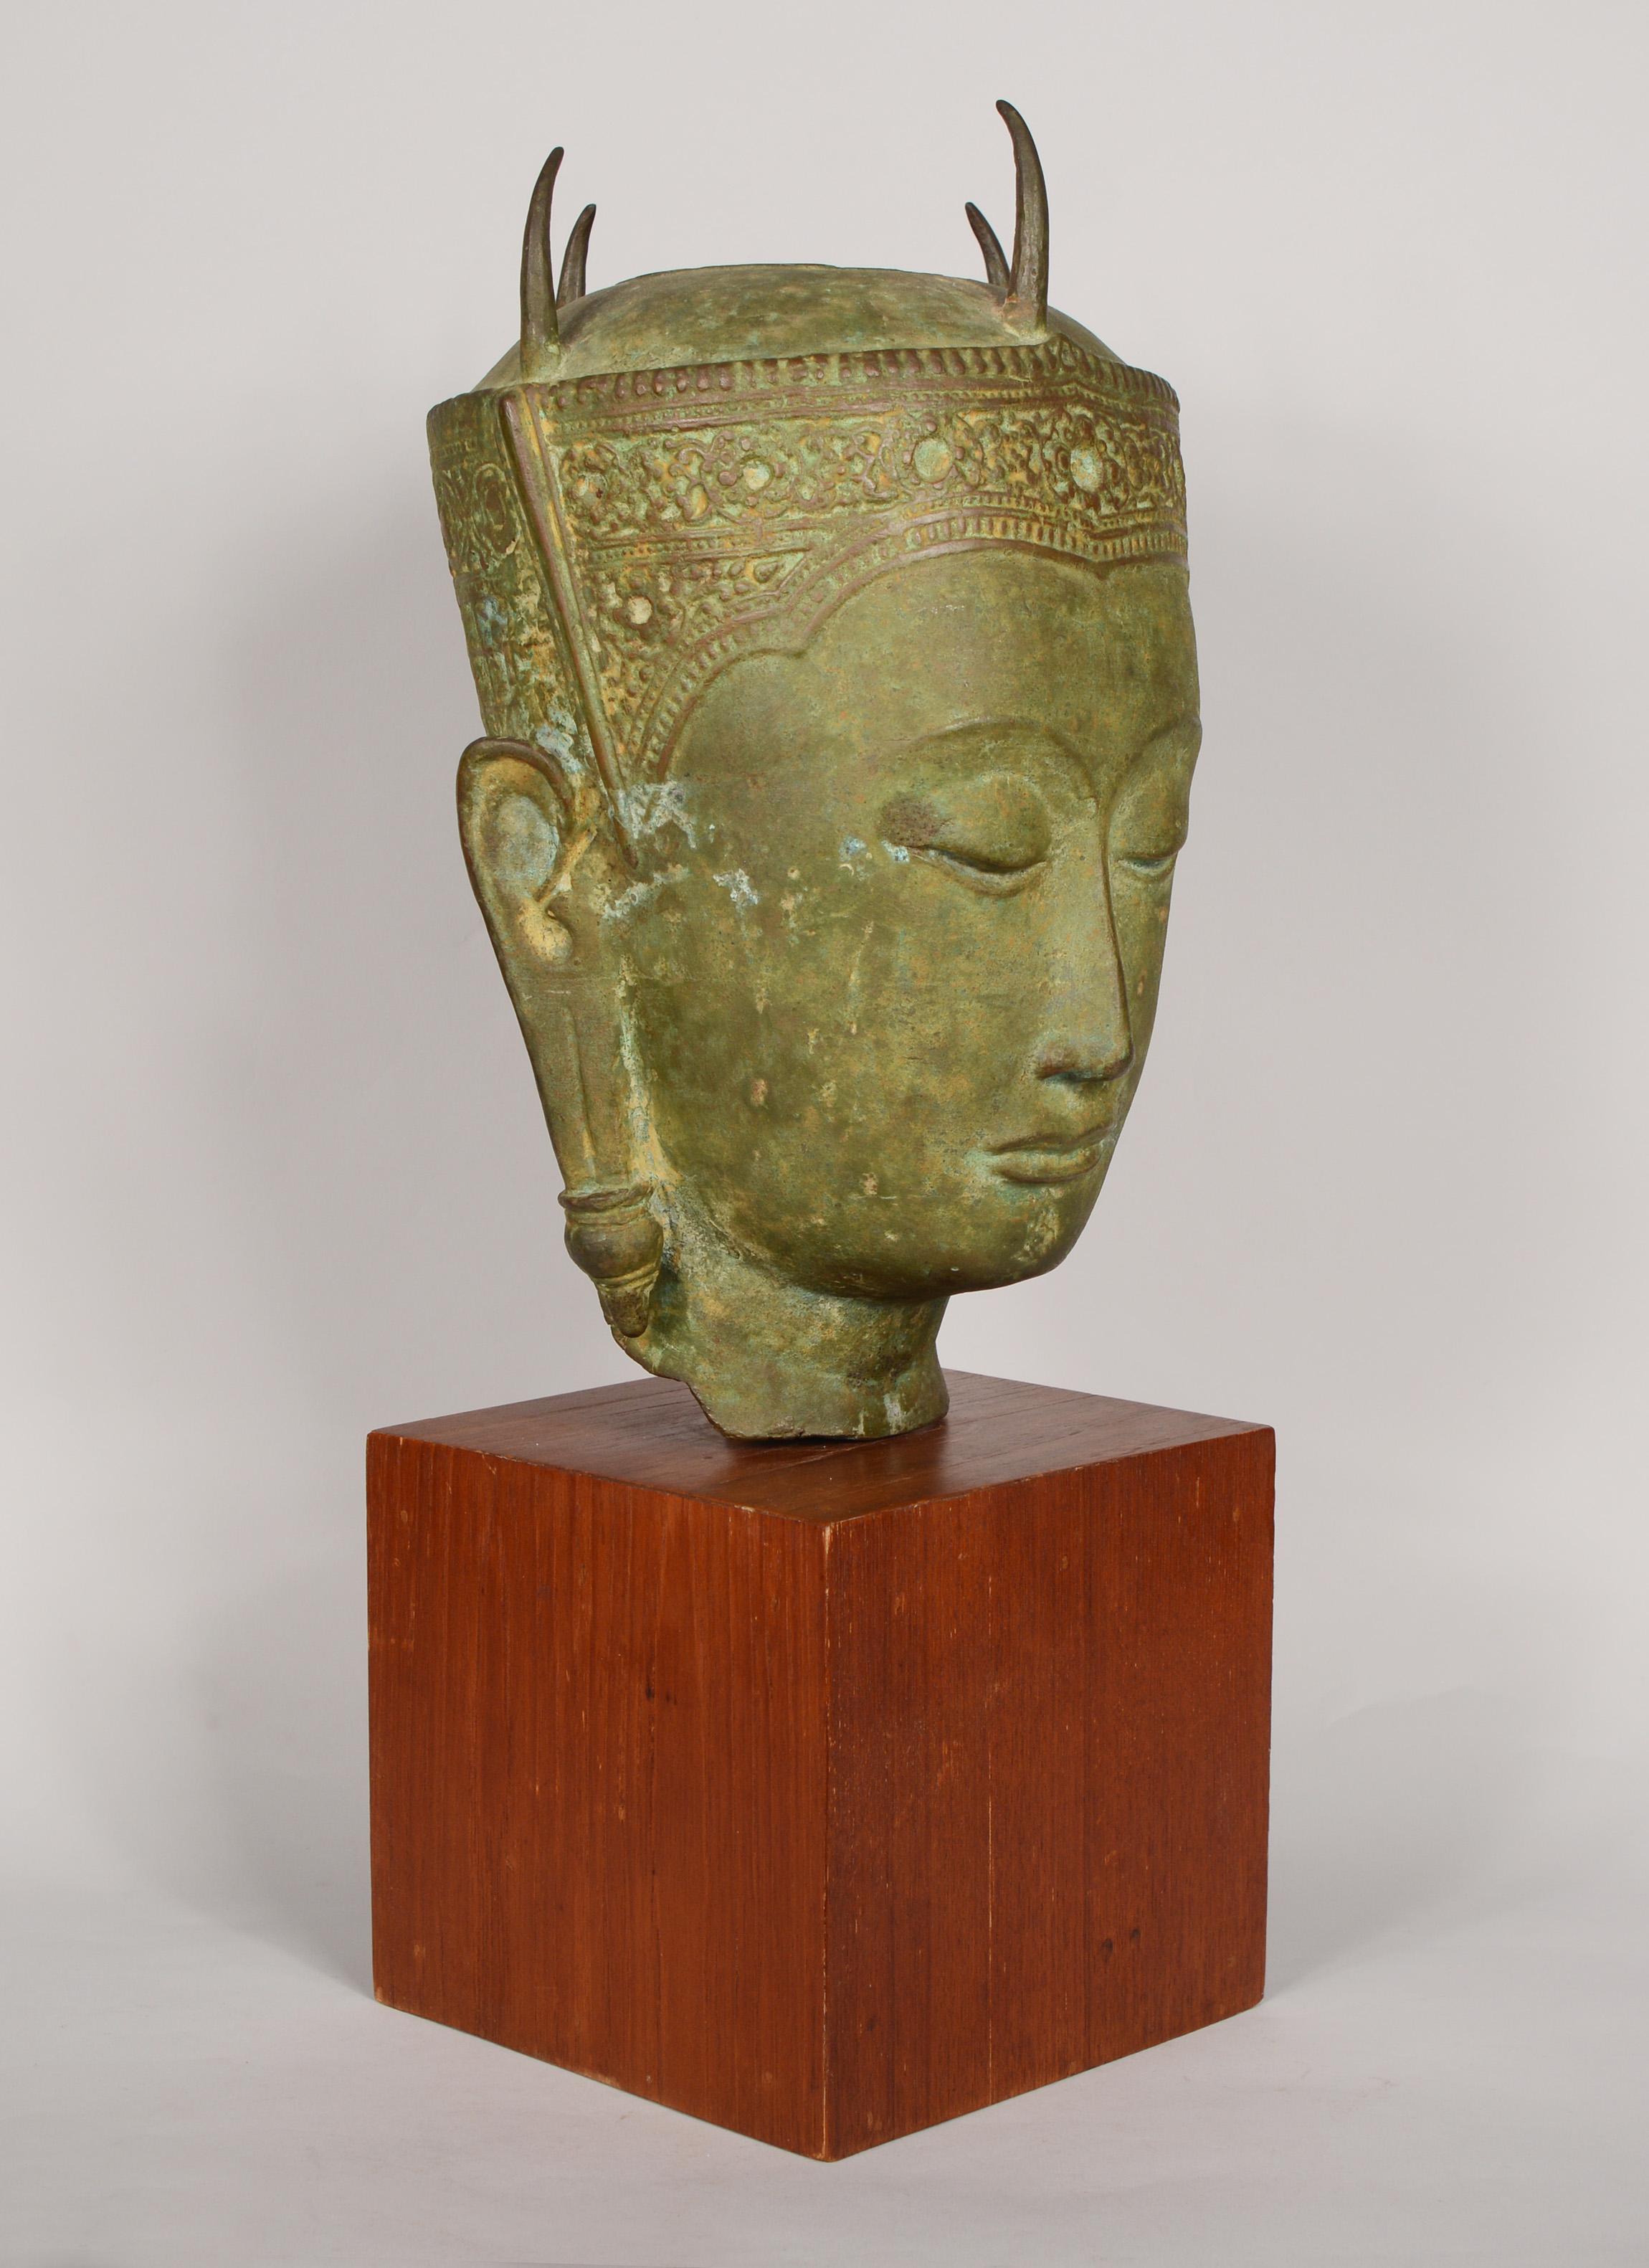 Large bronze head of Siamese Buddha from L'Ecole professionnelle de Bien Hôa (The Applied Arts School of Bien Hôa, Vietnam). This sculpture has a great form and presence. This has impressed signatures on the back of the neck. The bronze is in very